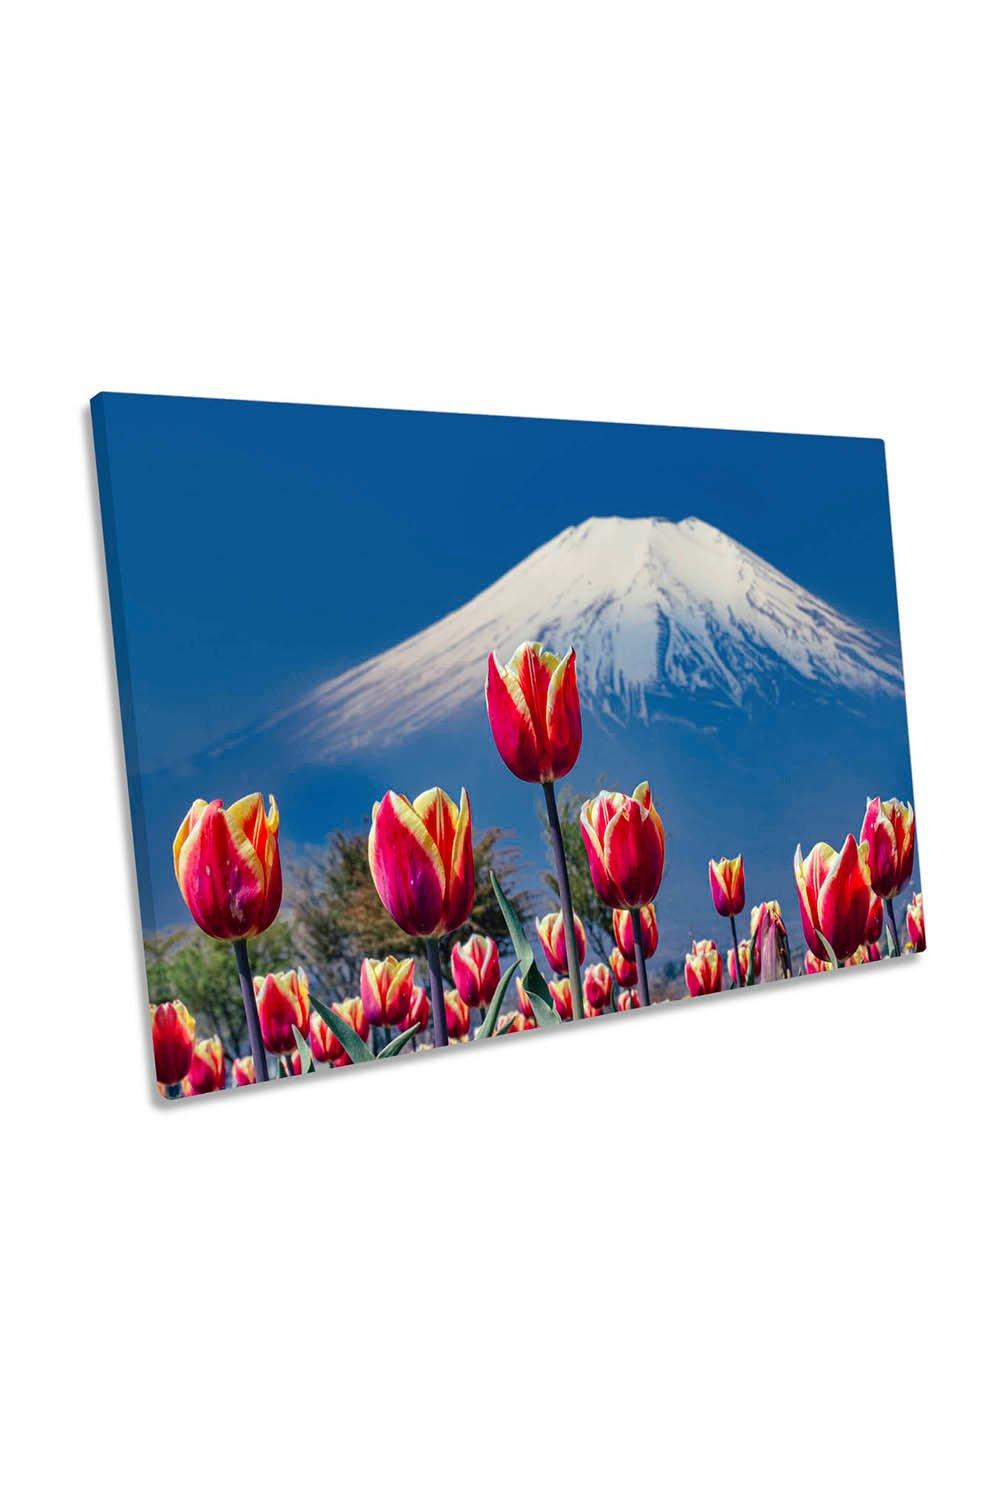 Red Tulips Flowers Mount Fuji Canvas Wall Art Picture Print